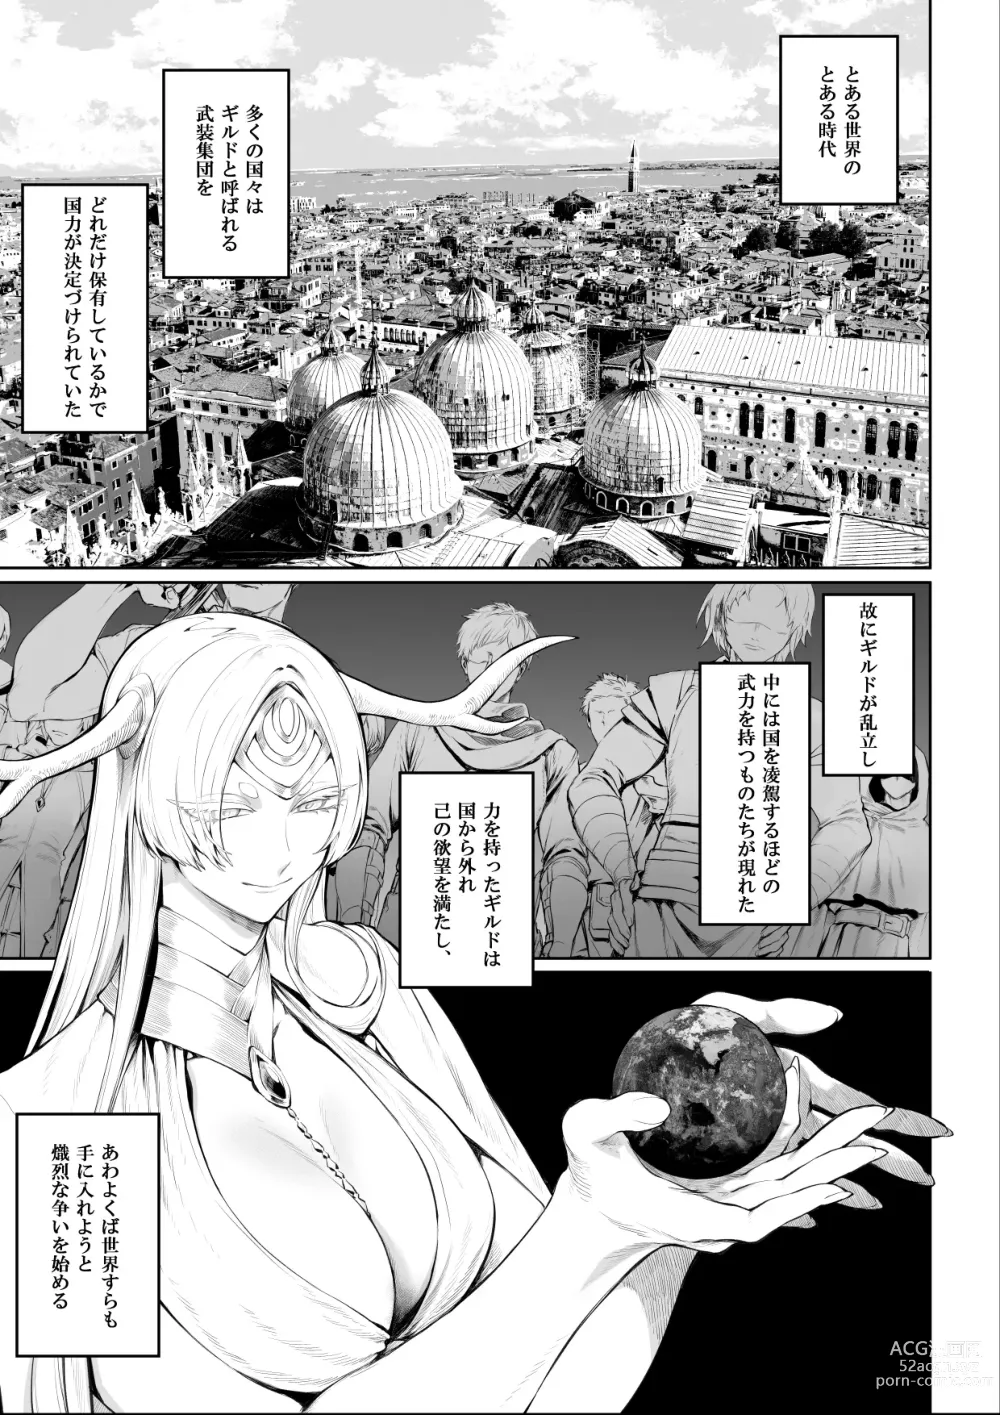 Page 2 of doujinshi 戦乙女といくさごと！〜女魔法使い編〜